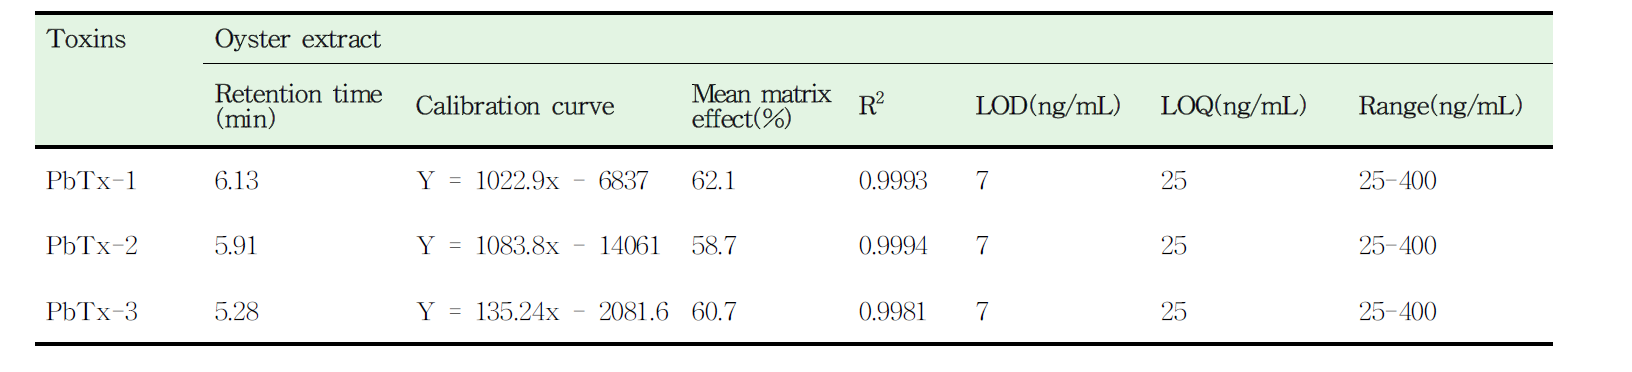 Calibration curves, LOD and LOQ of the NSP toxins in oyster extract